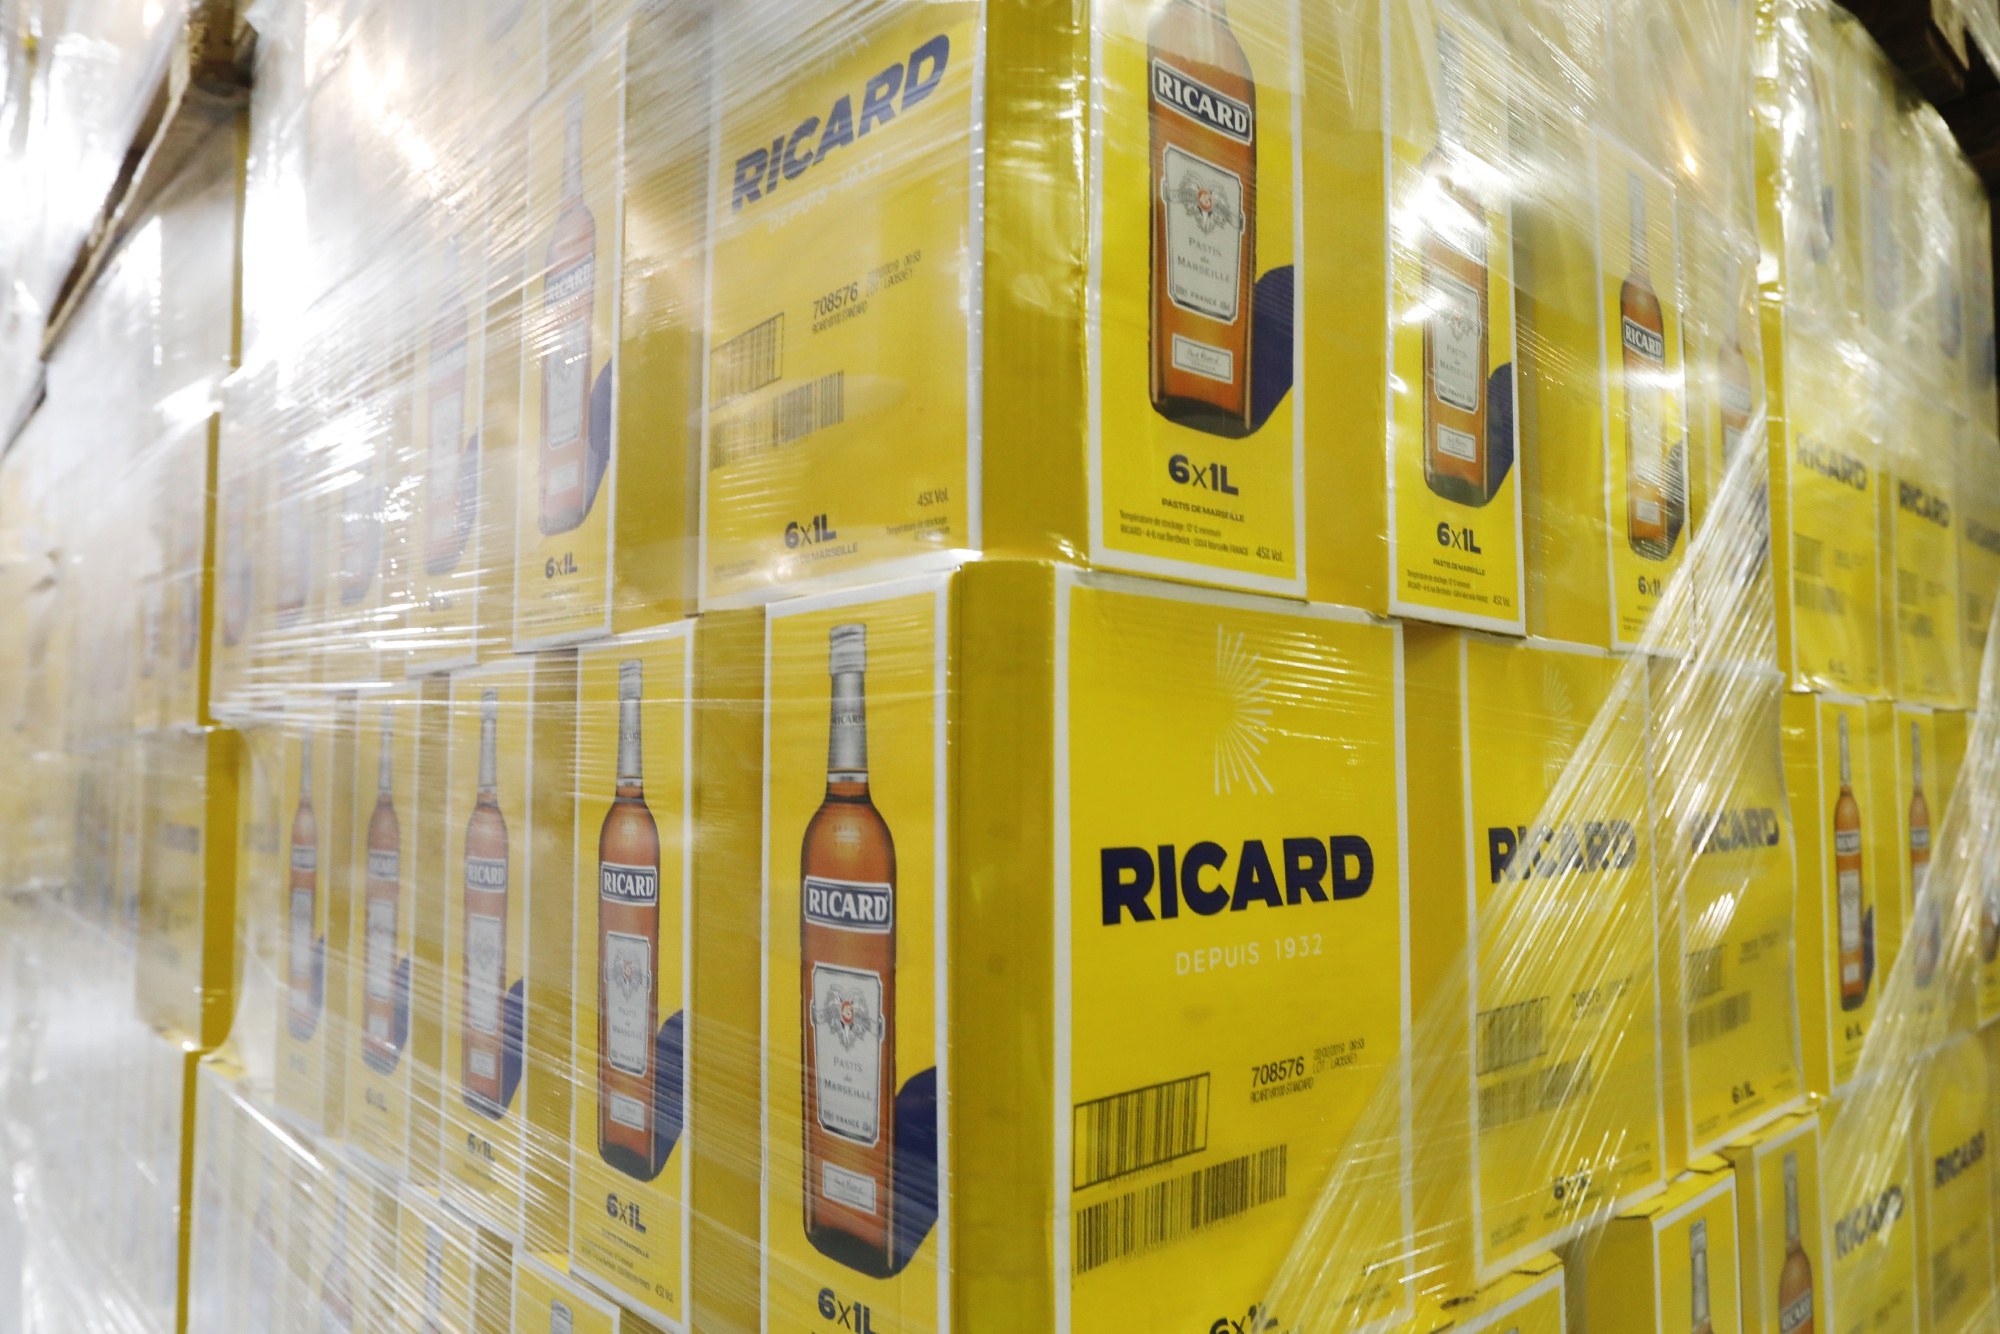 US and Spain boost Pernod Ricard's growth - The Drinks Business